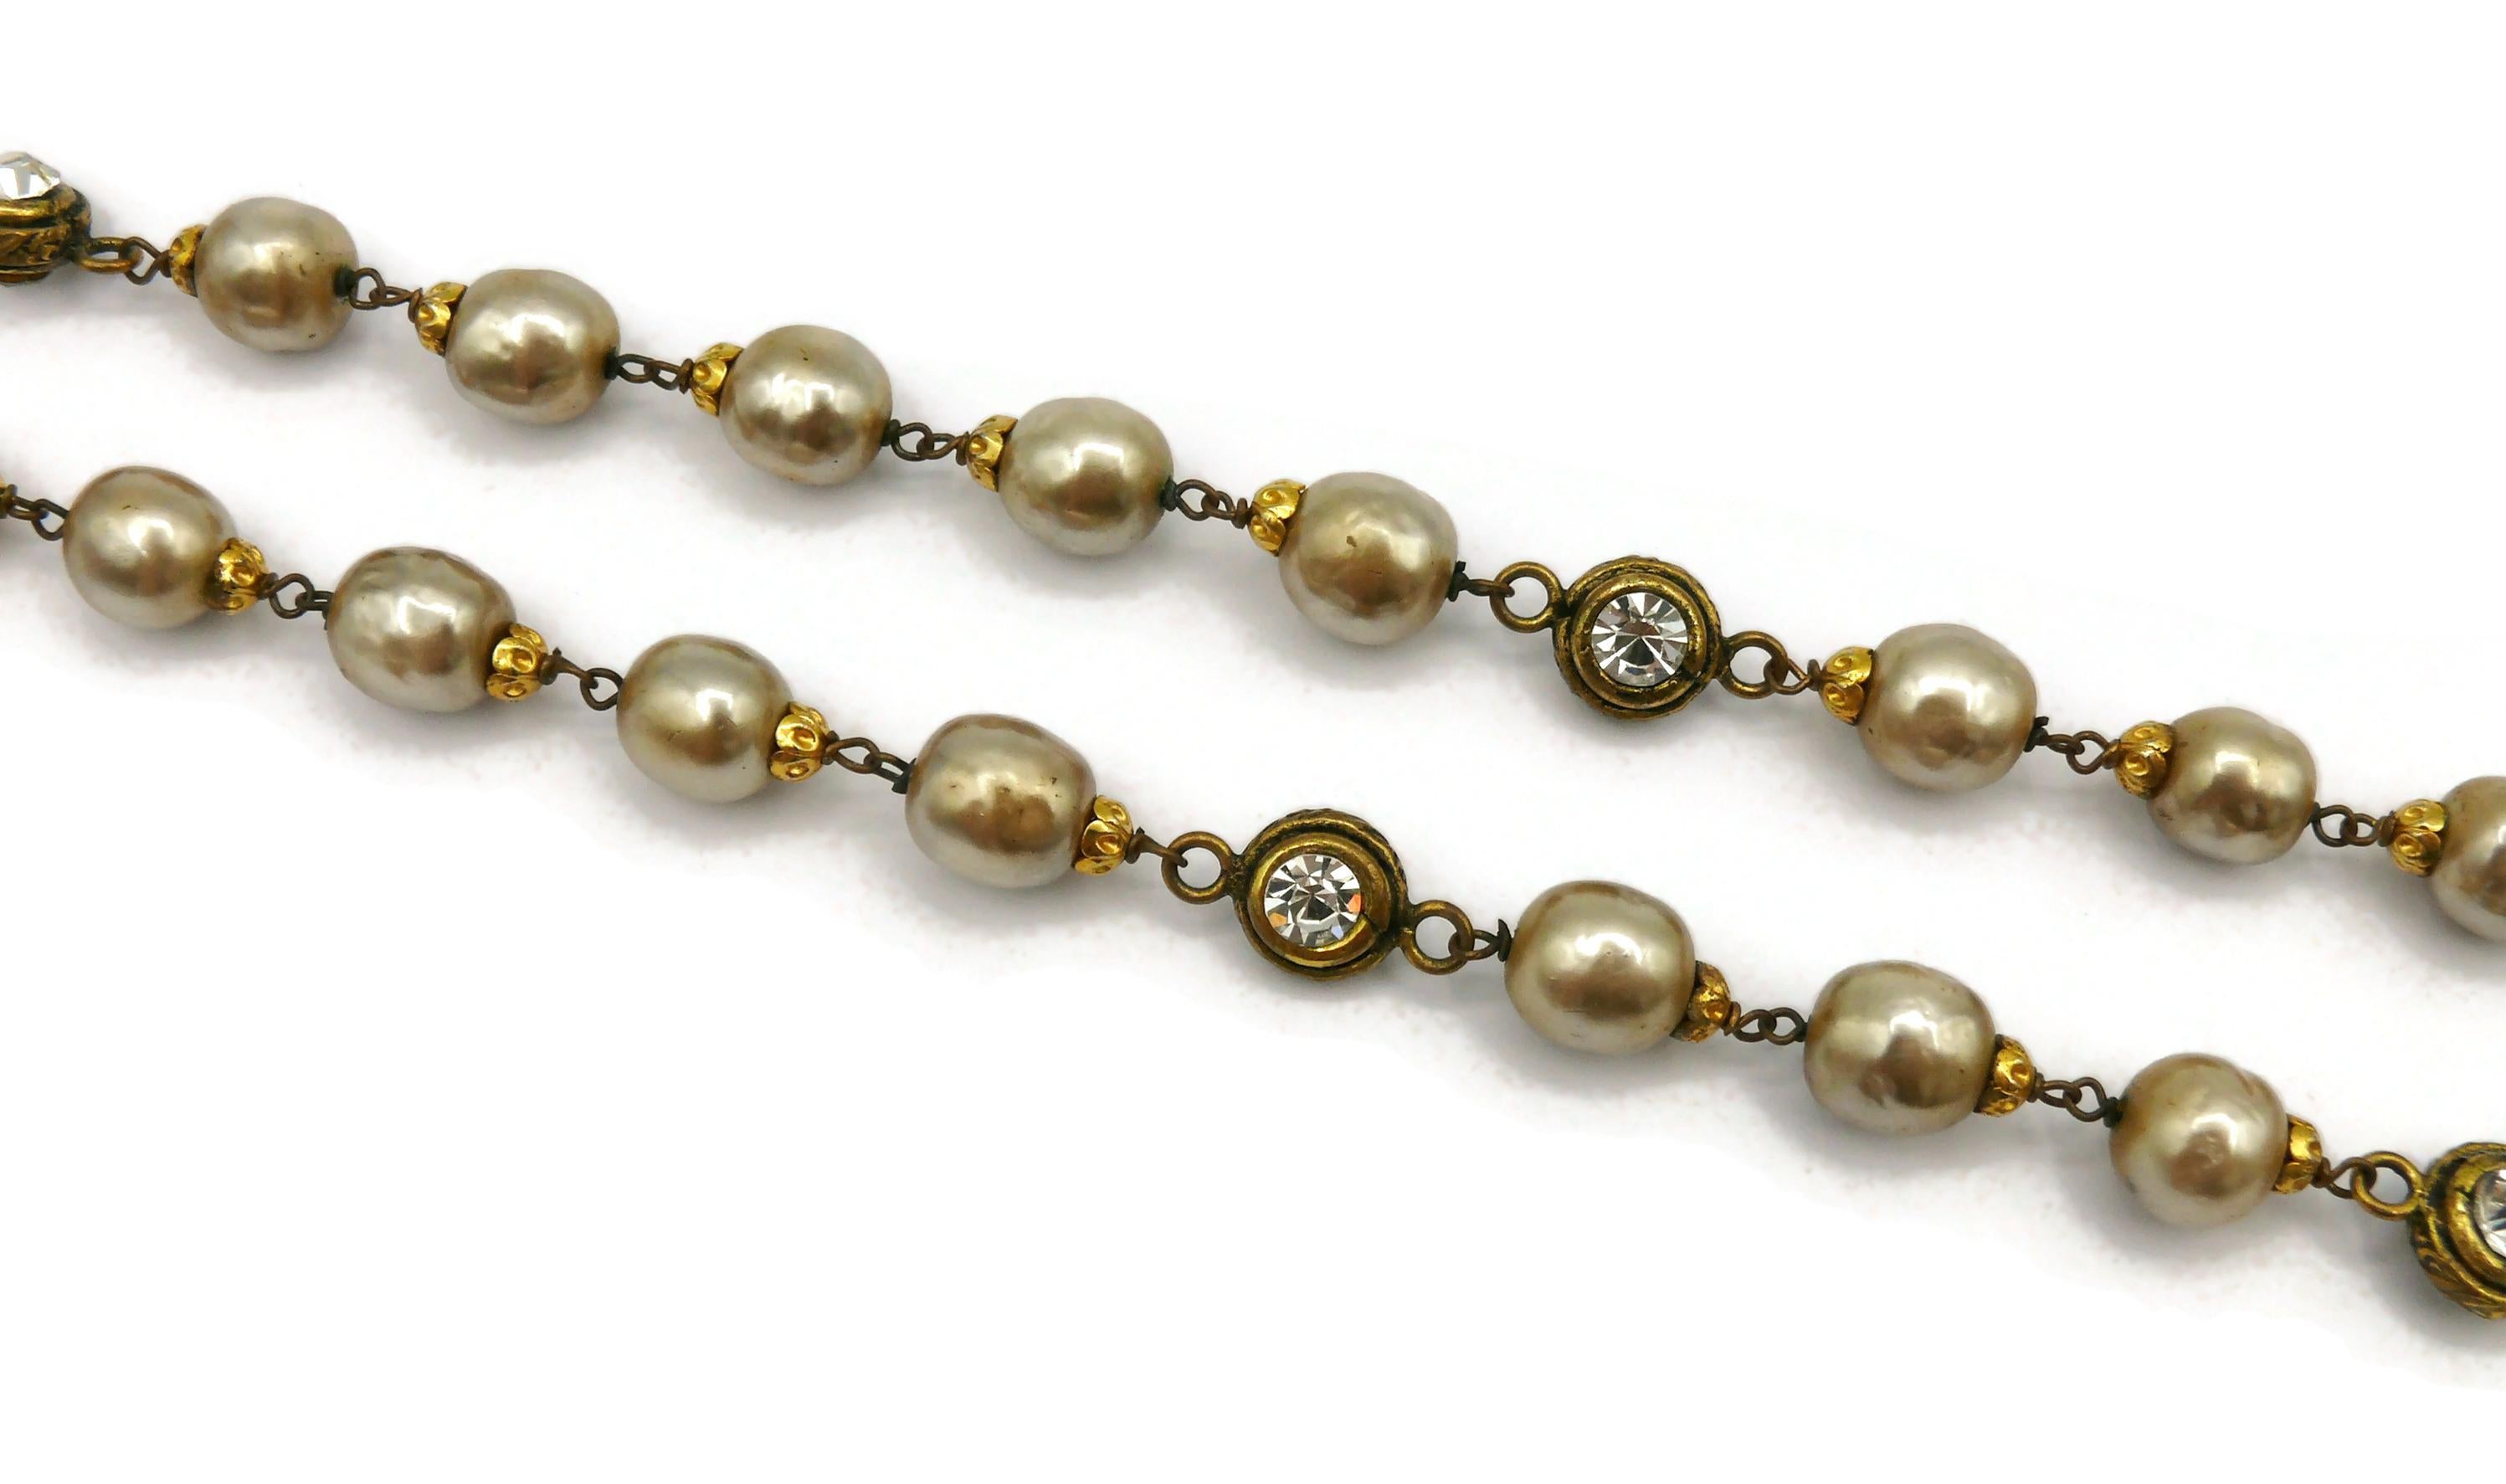 CHANEL Vintage Pearl & Crystal Sautoir Necklace, 1983 For Sale 3